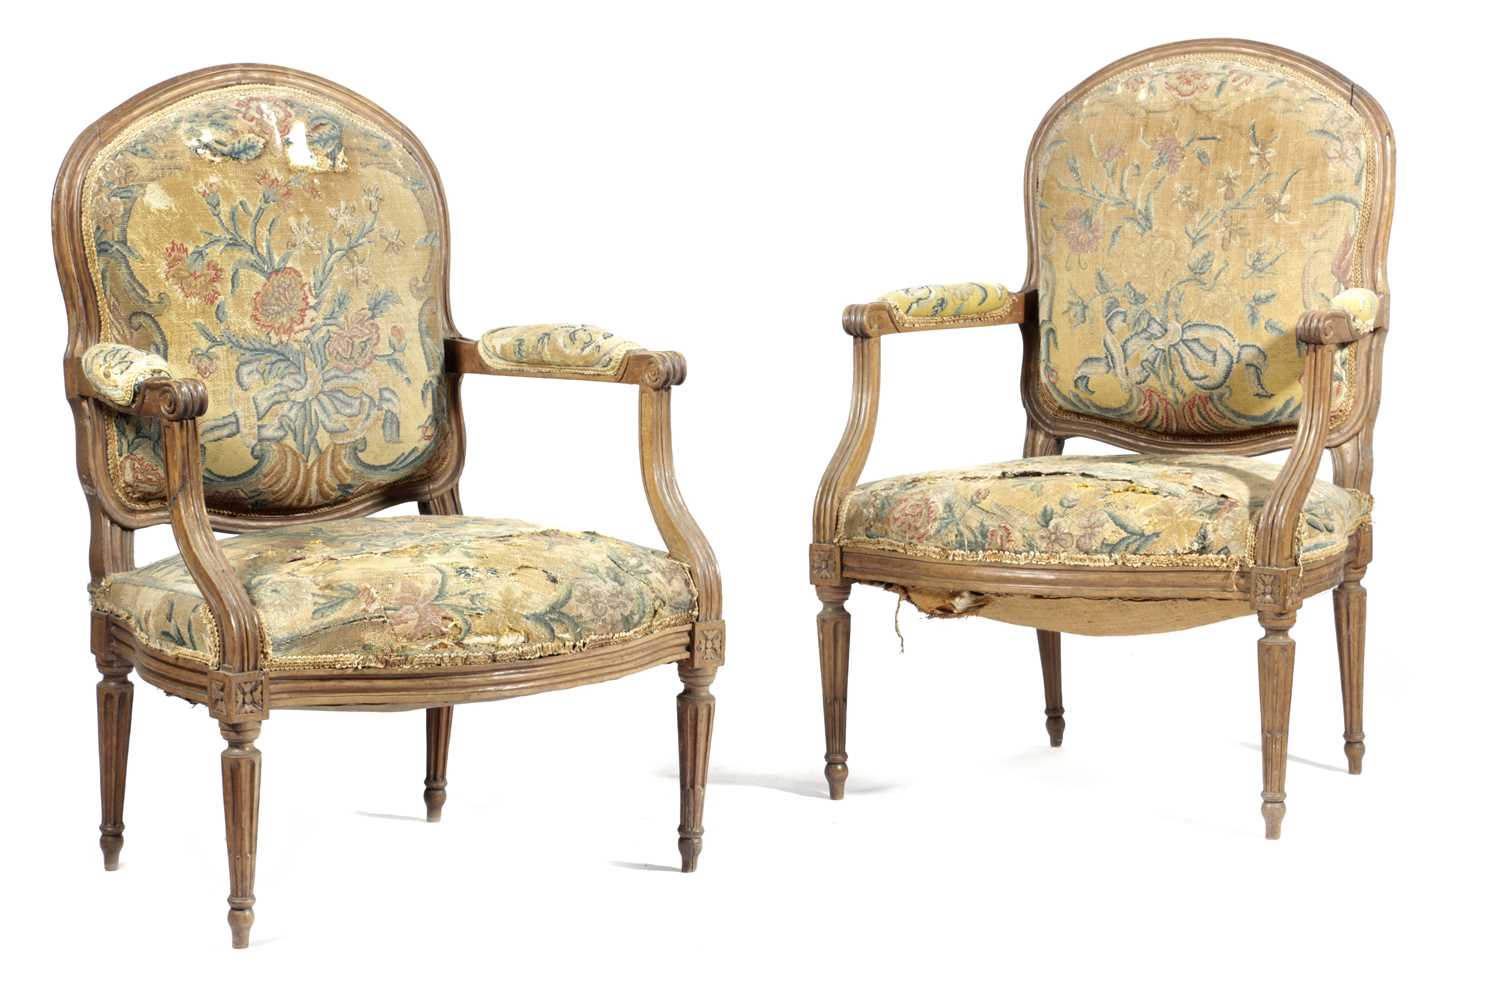 A PAIR OF FRENCH BEECHWOOD FAUTEUIL IN LOUIS XVI STYLE, 19TH CENTURY upholstered with floral